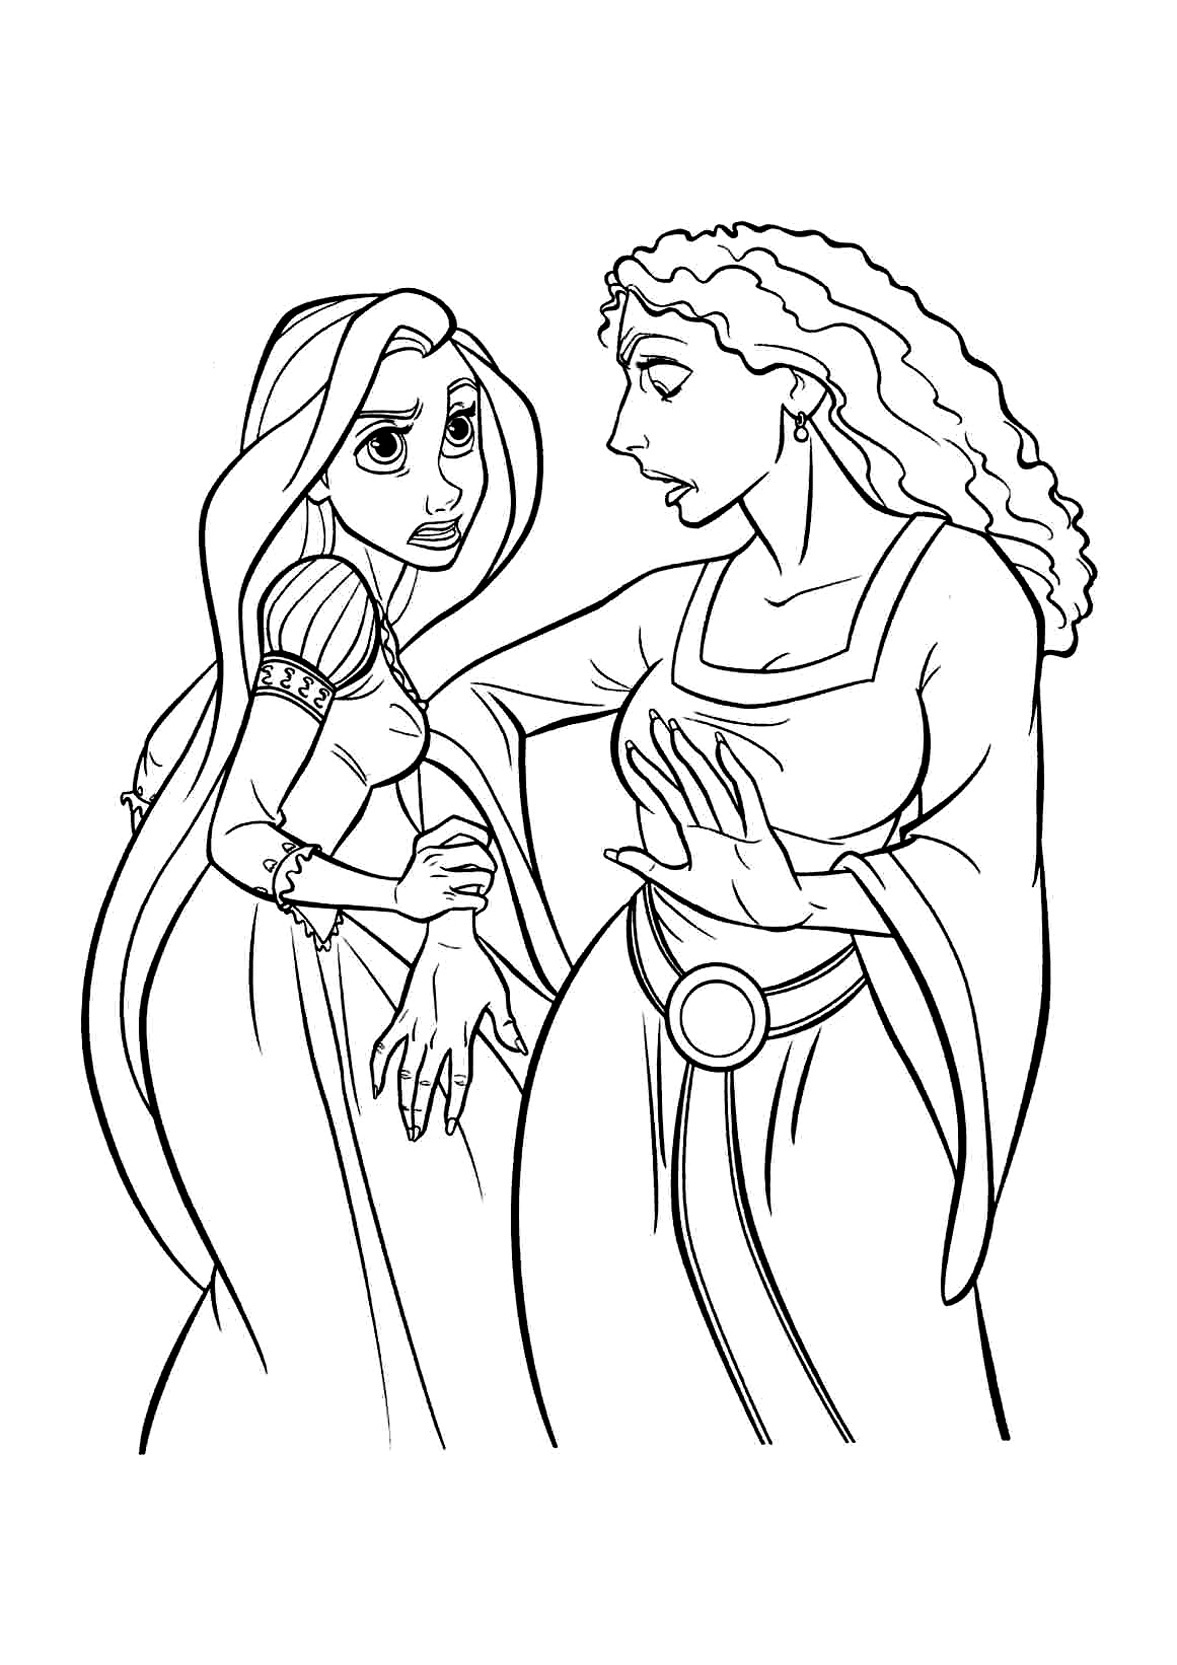 Rapunzel and Witch Mother Gothel Tangled Free Printable Coloring Pages